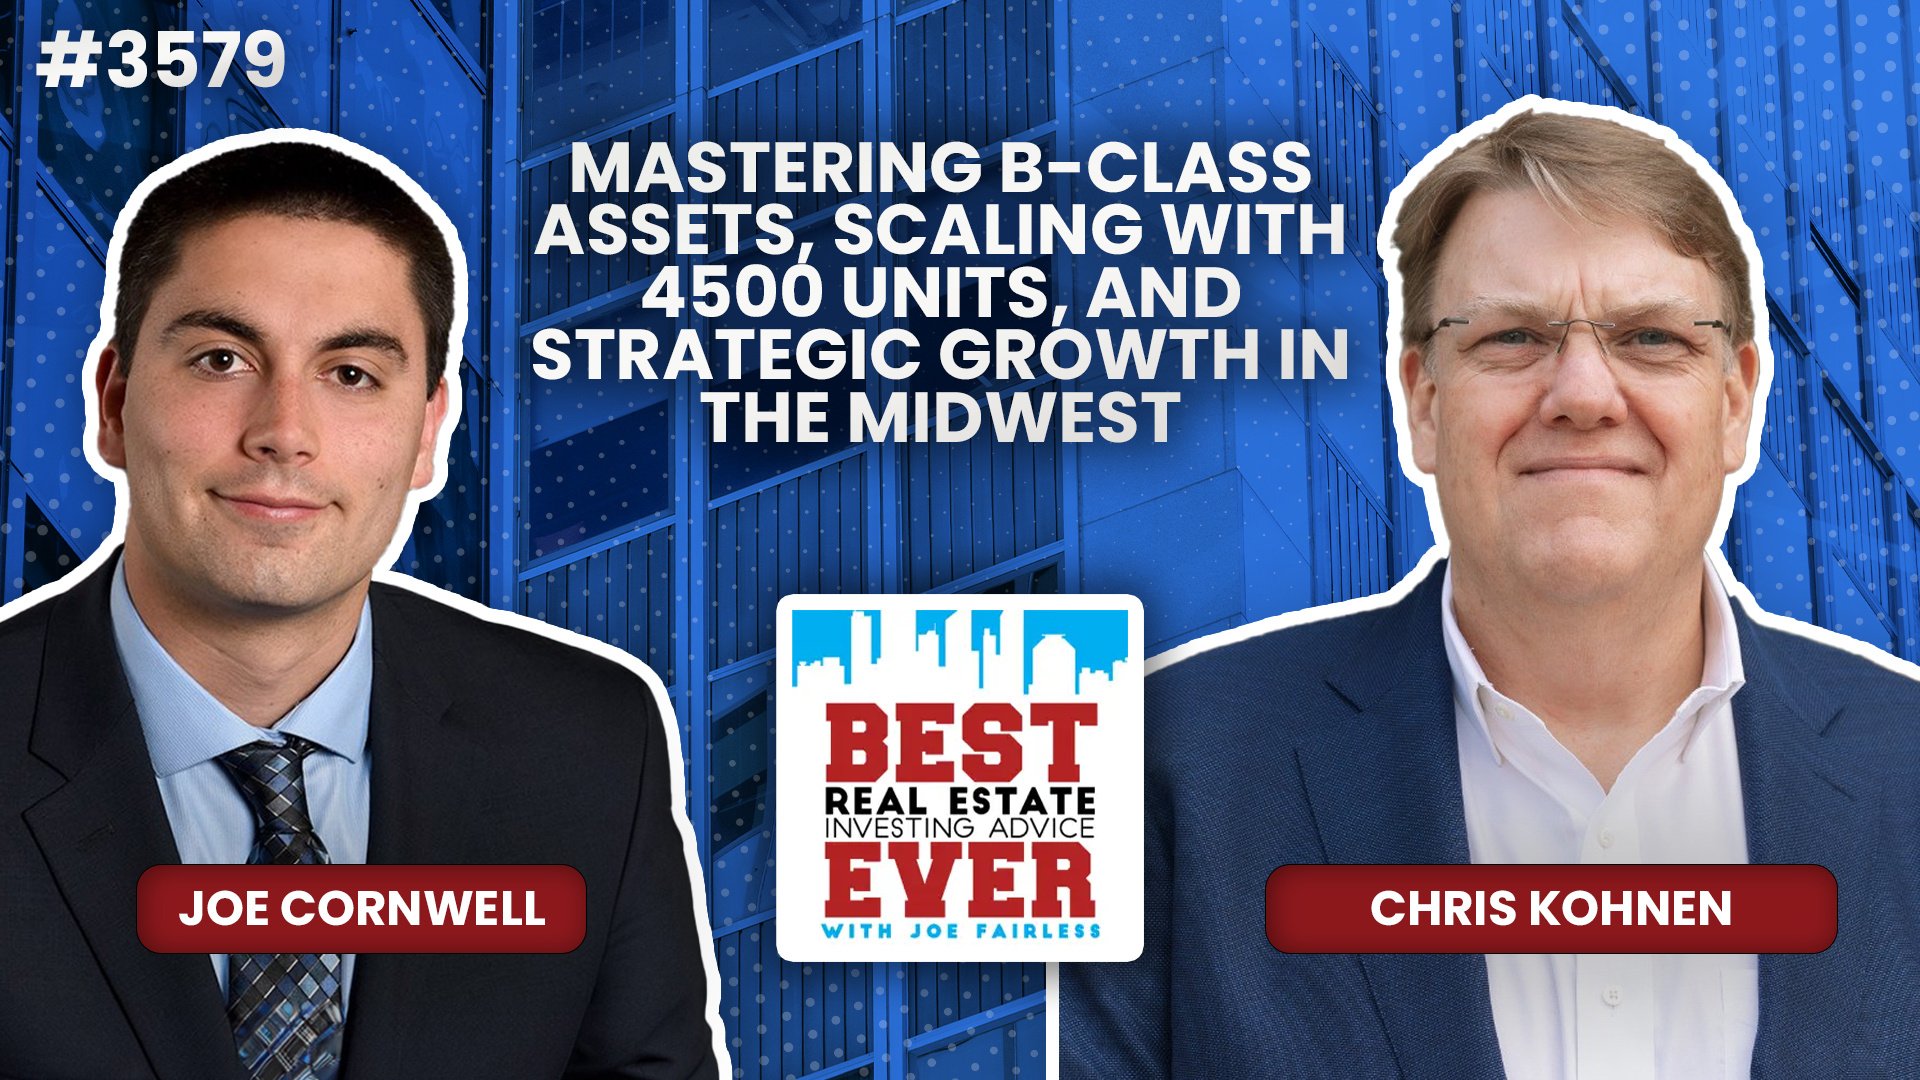 JF3579: Mastering B-Class Assets, Scaling with 4500 Units, and Strategic Growth in the Midwest ft. Chris Kohnen